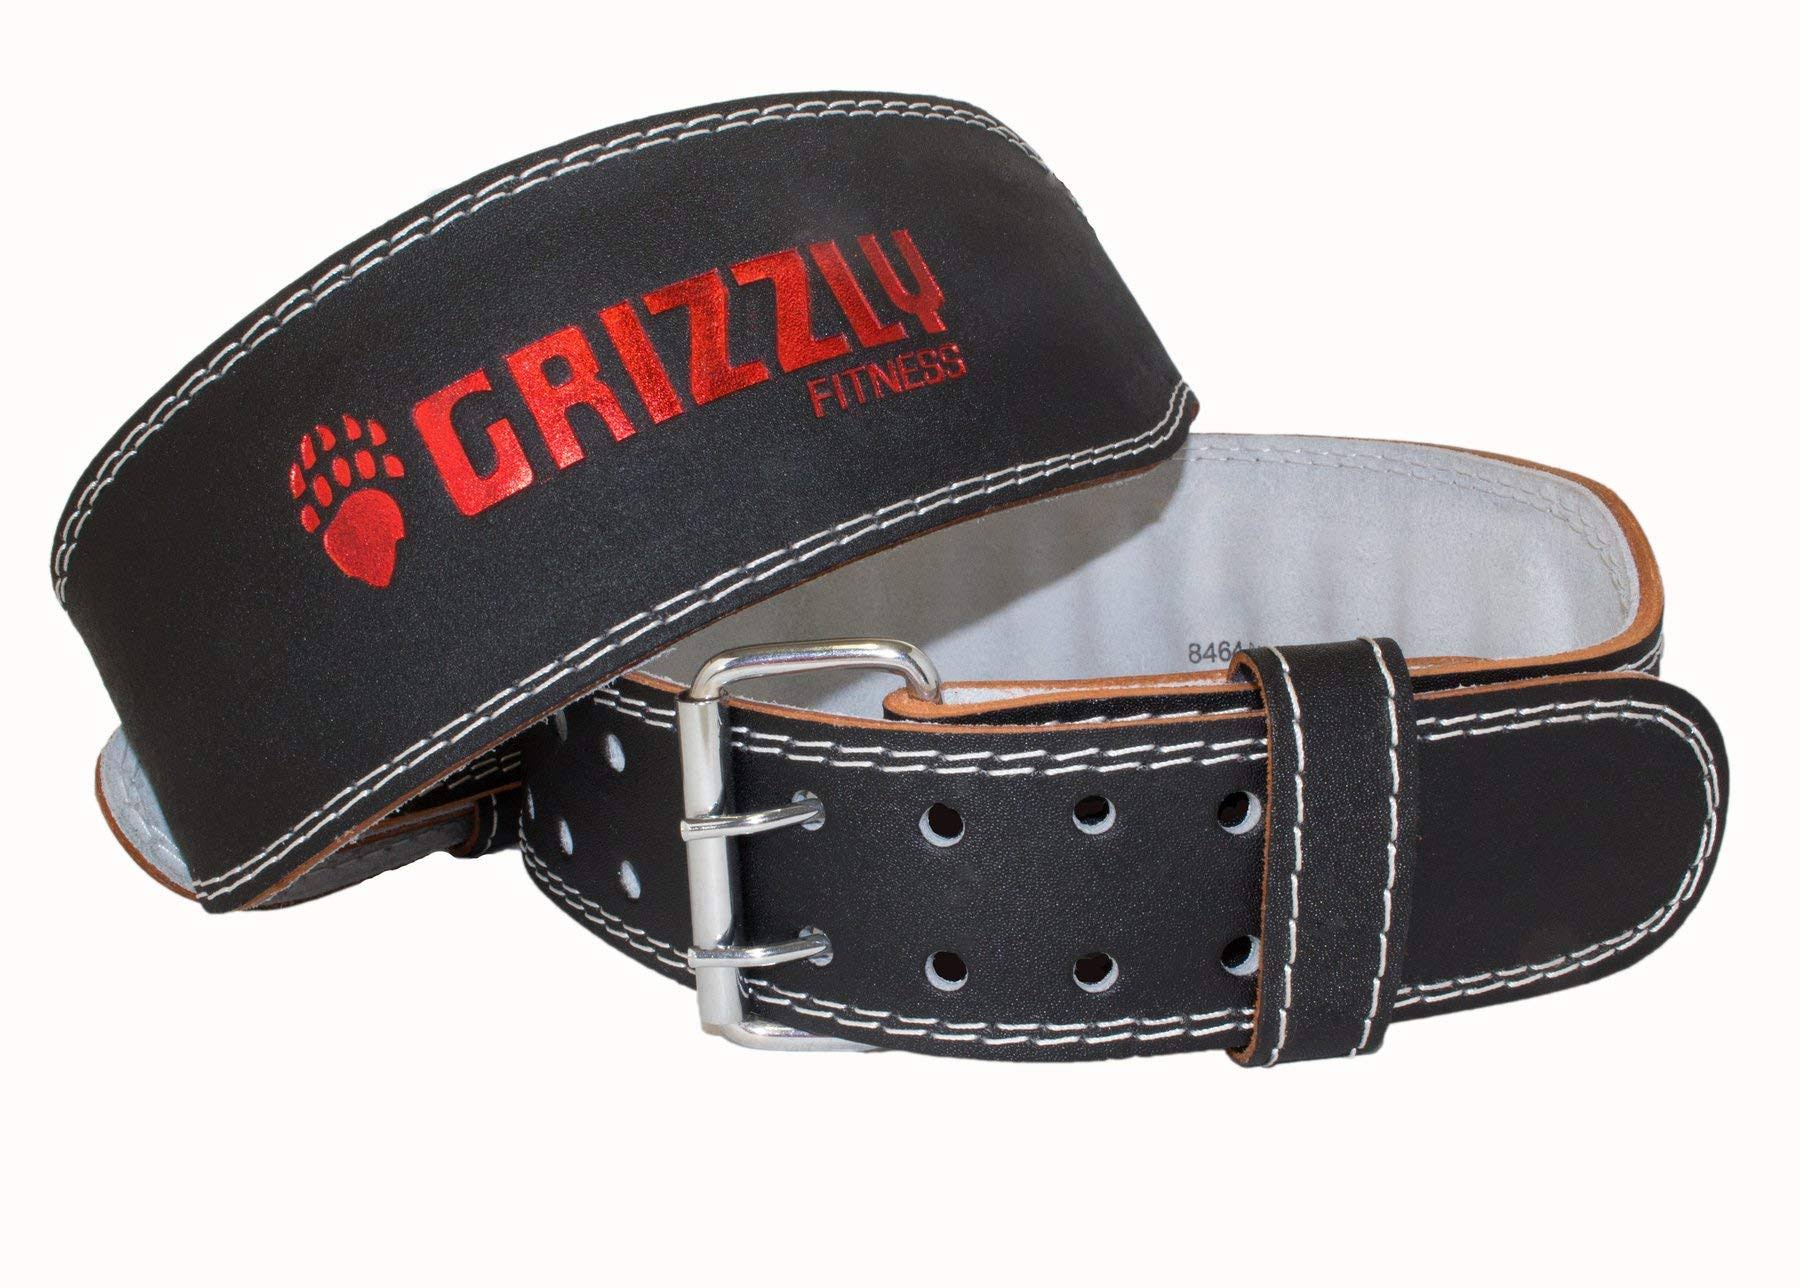 Grizzly Fitness 4-Inch Padded Enforcer Training Belt